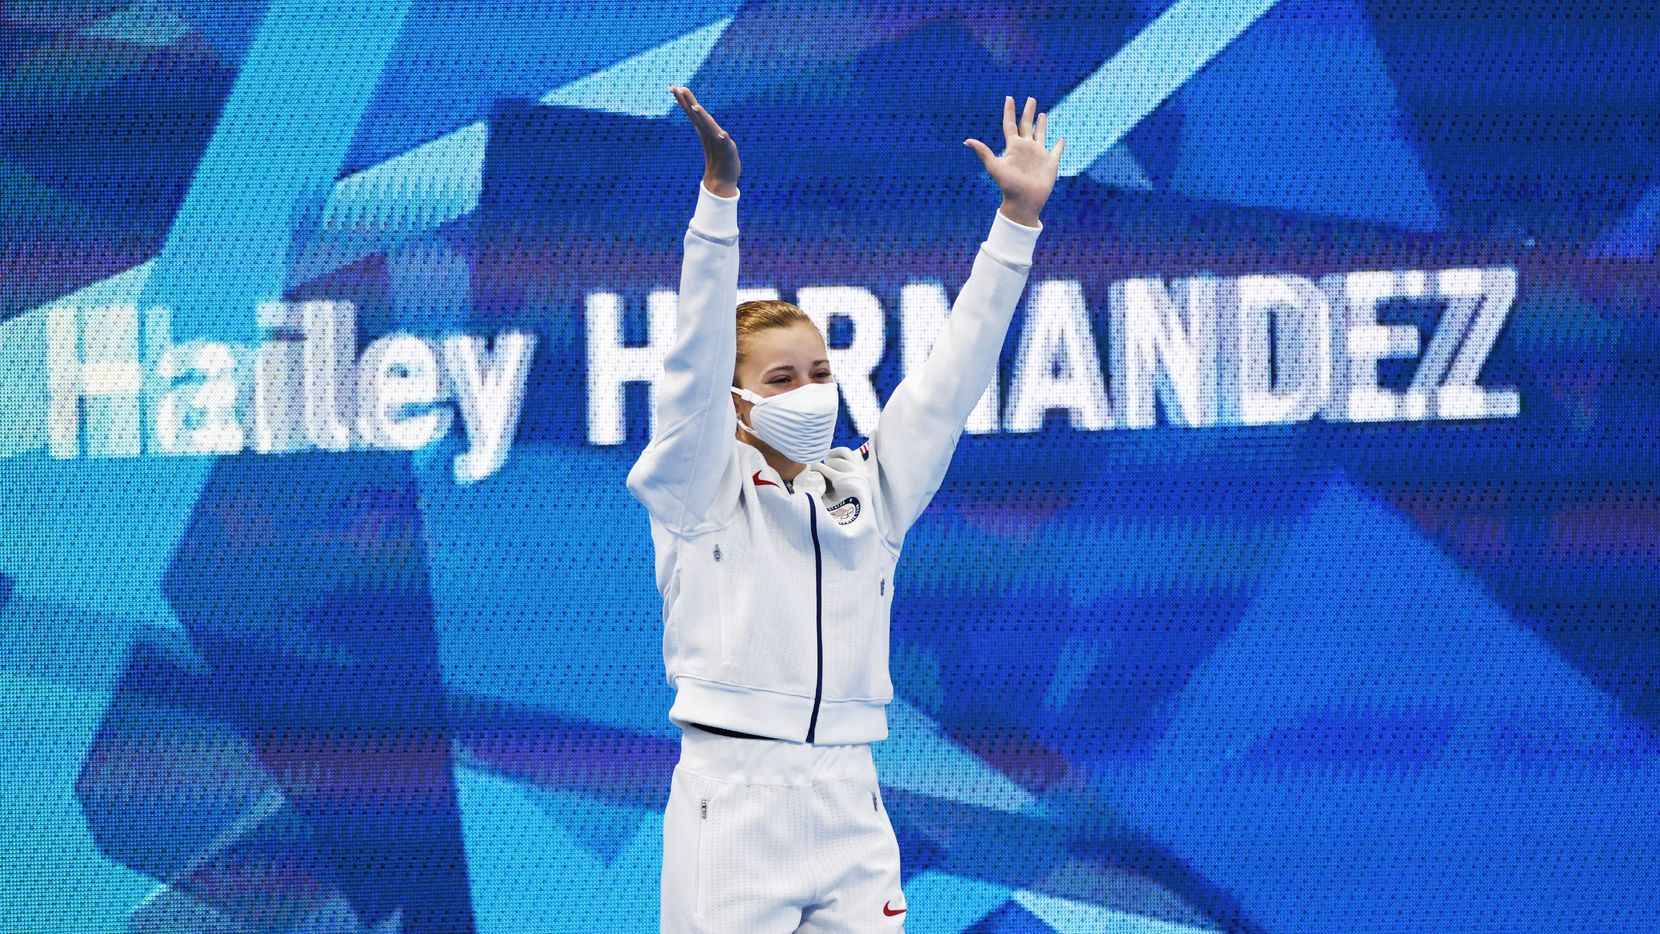 USA’s Hailey Hernandez waves as she is introduced before the start of the women’s 3 meter...